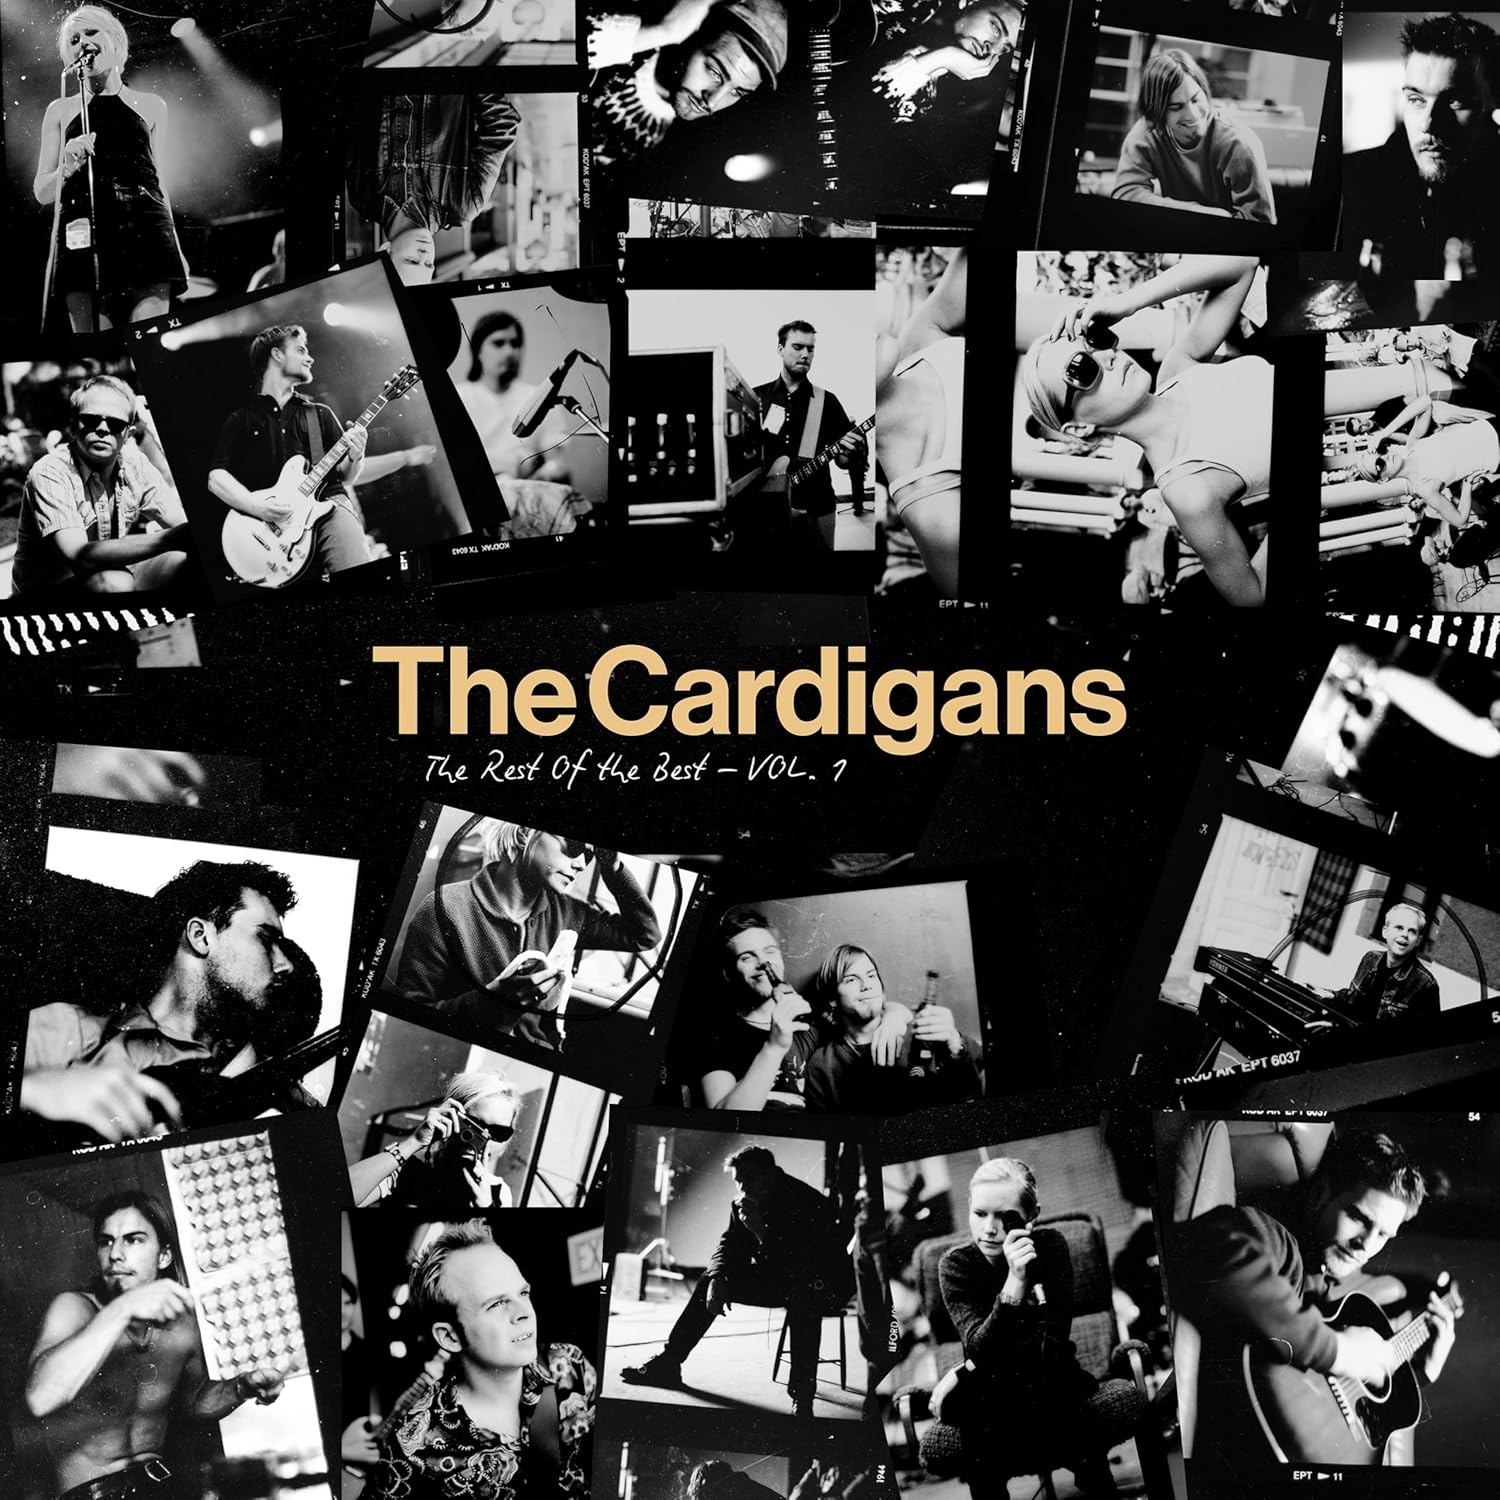 The Cardigans / The Rest of the Best Vol 2 compilation